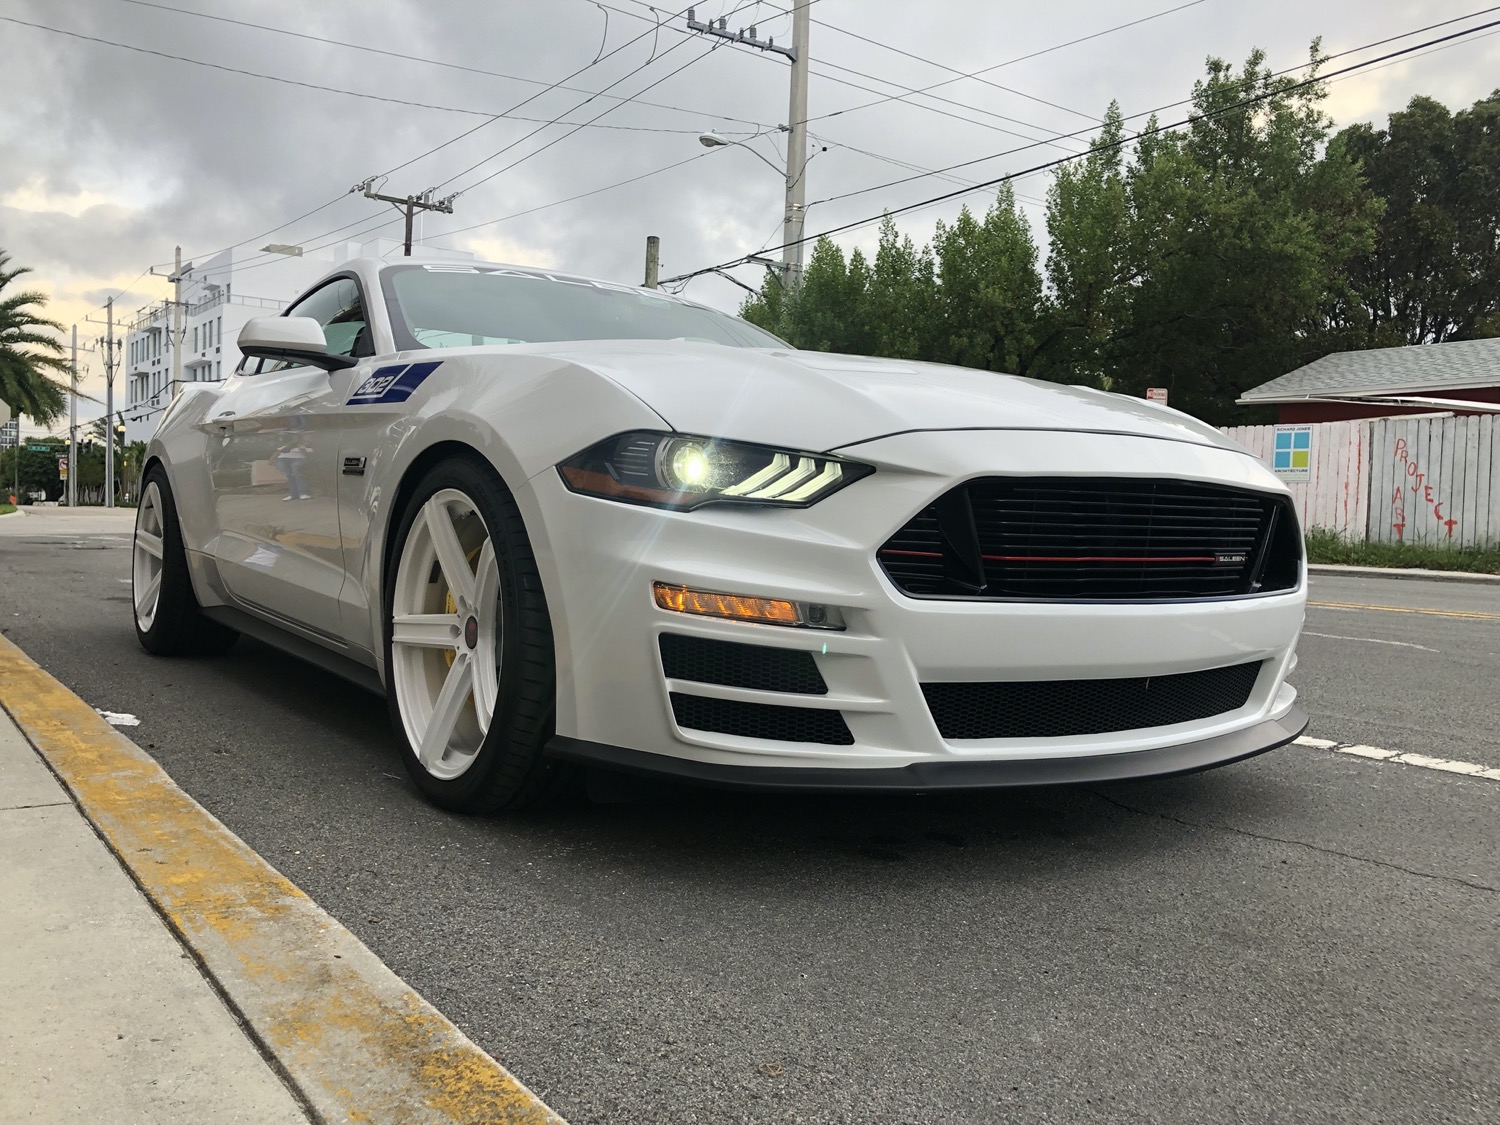 Driving The Saleen Mustang White Label: The Exterior